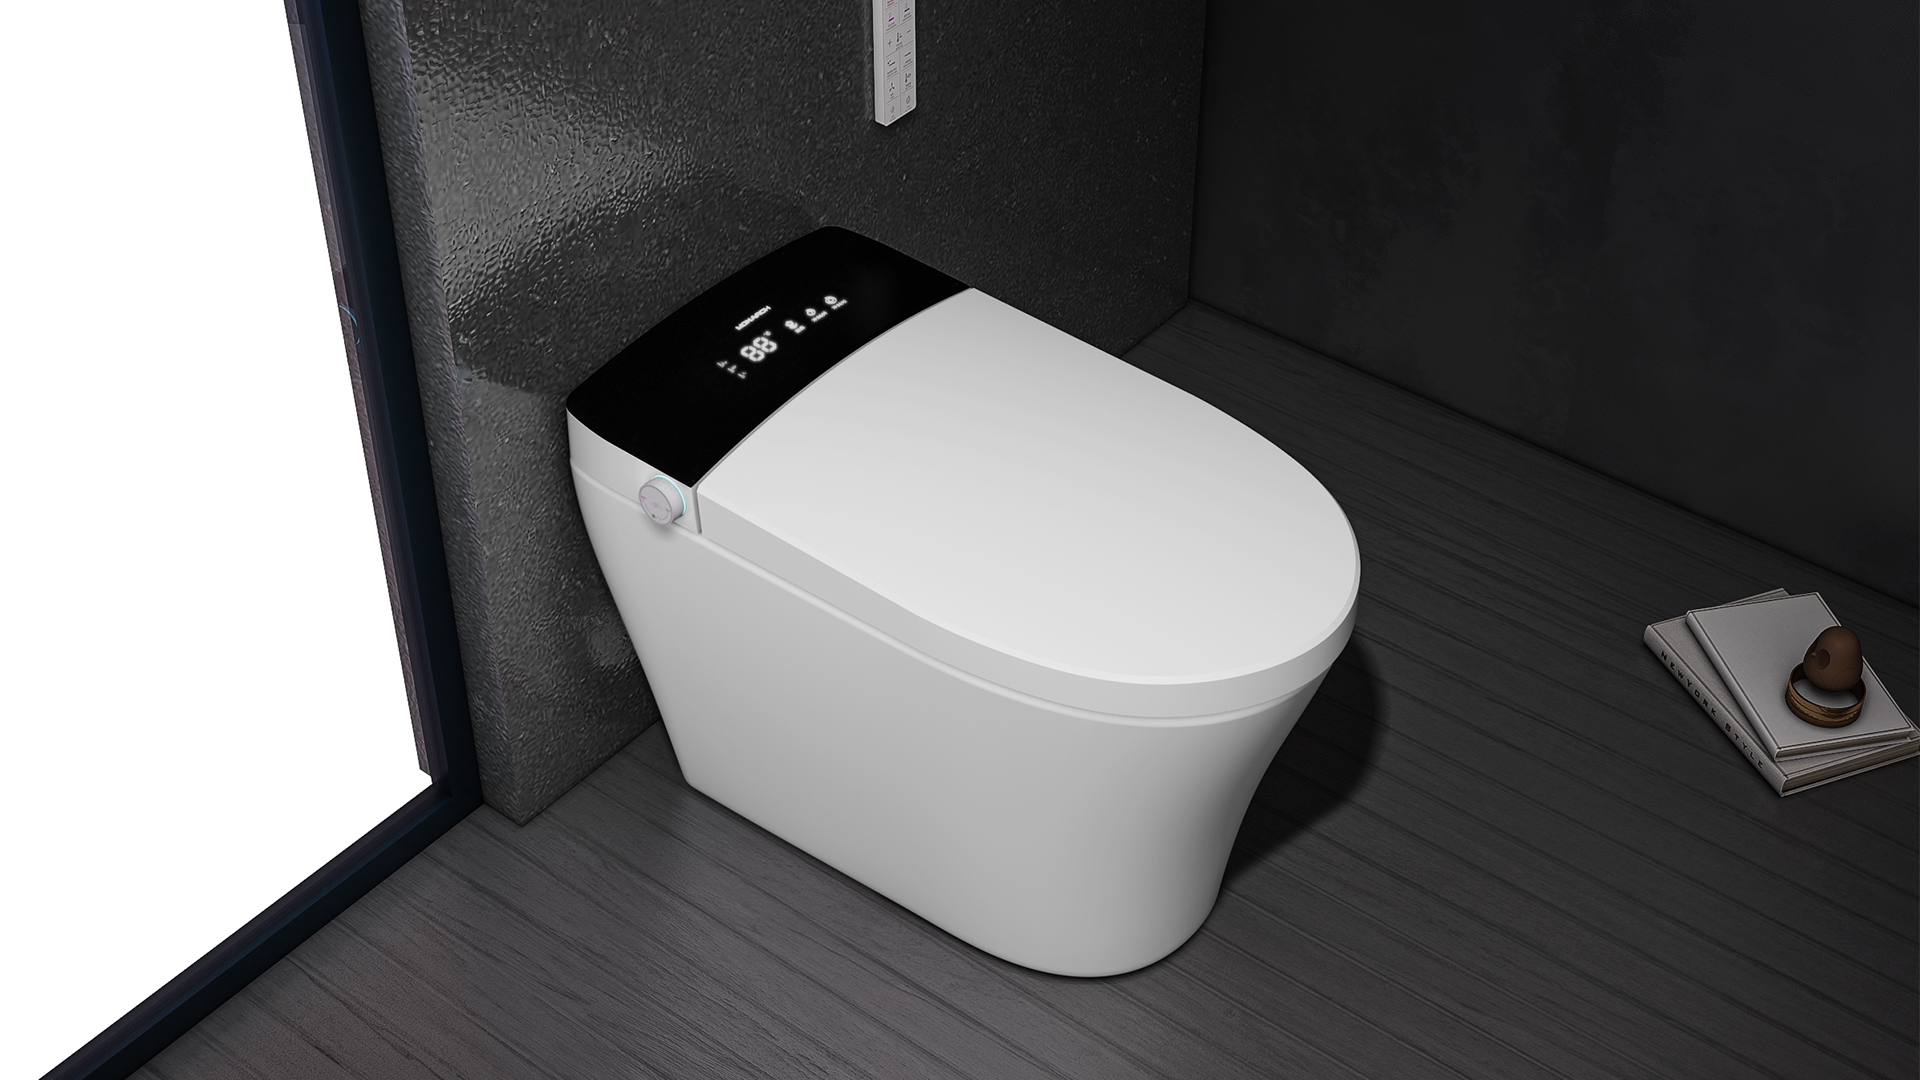 What should I pay attention to when I choose to buy a smart toilet?